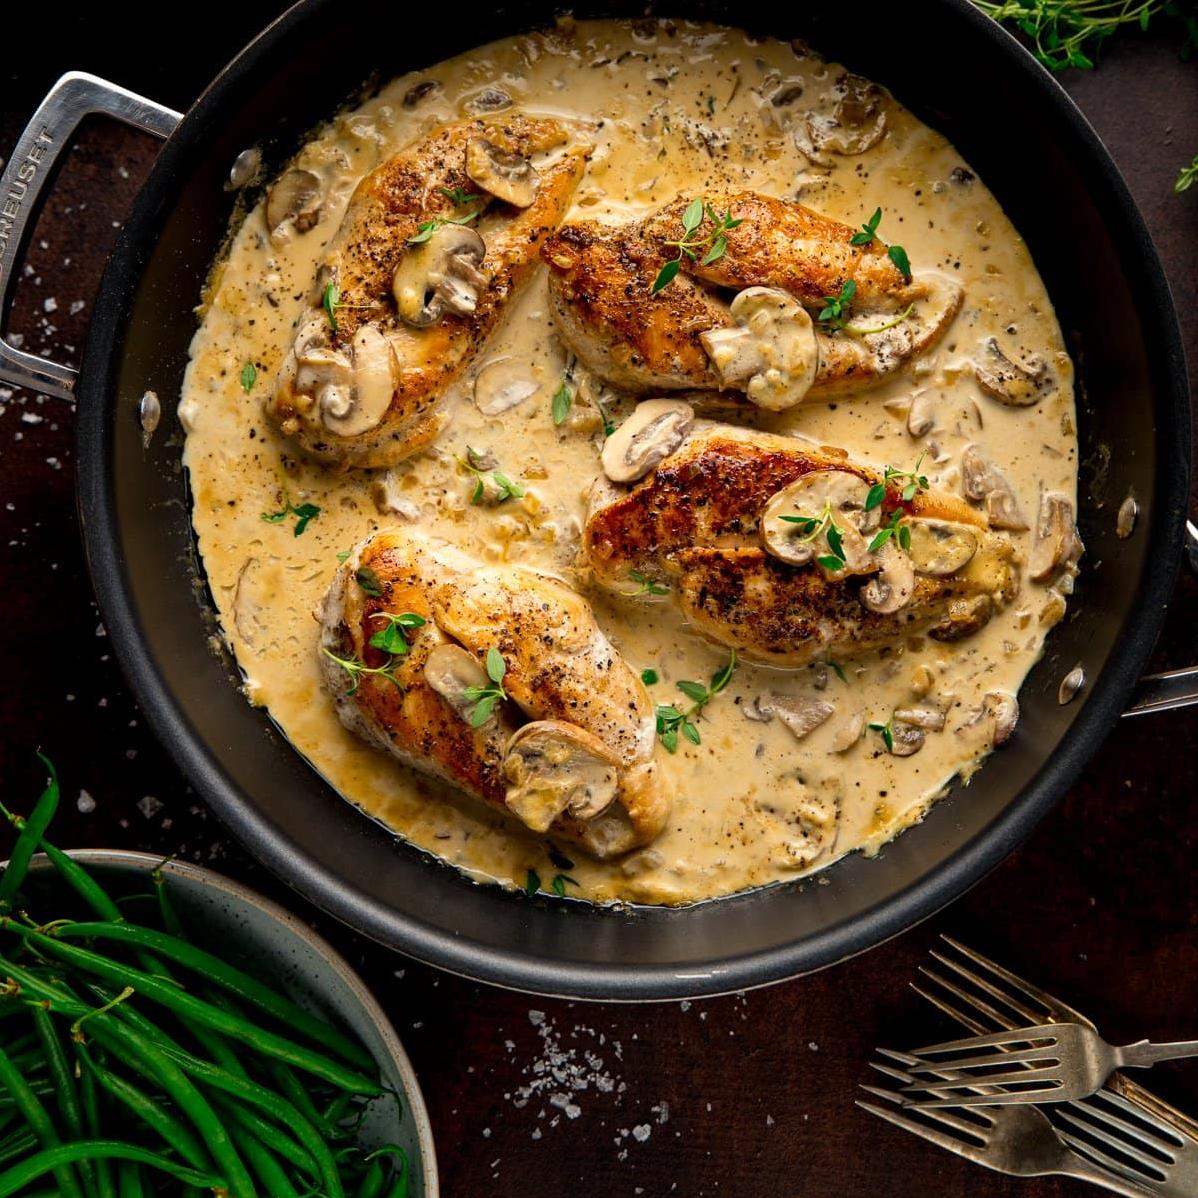  Savory chicken cooked to perfection with earthy mushrooms and white wine.